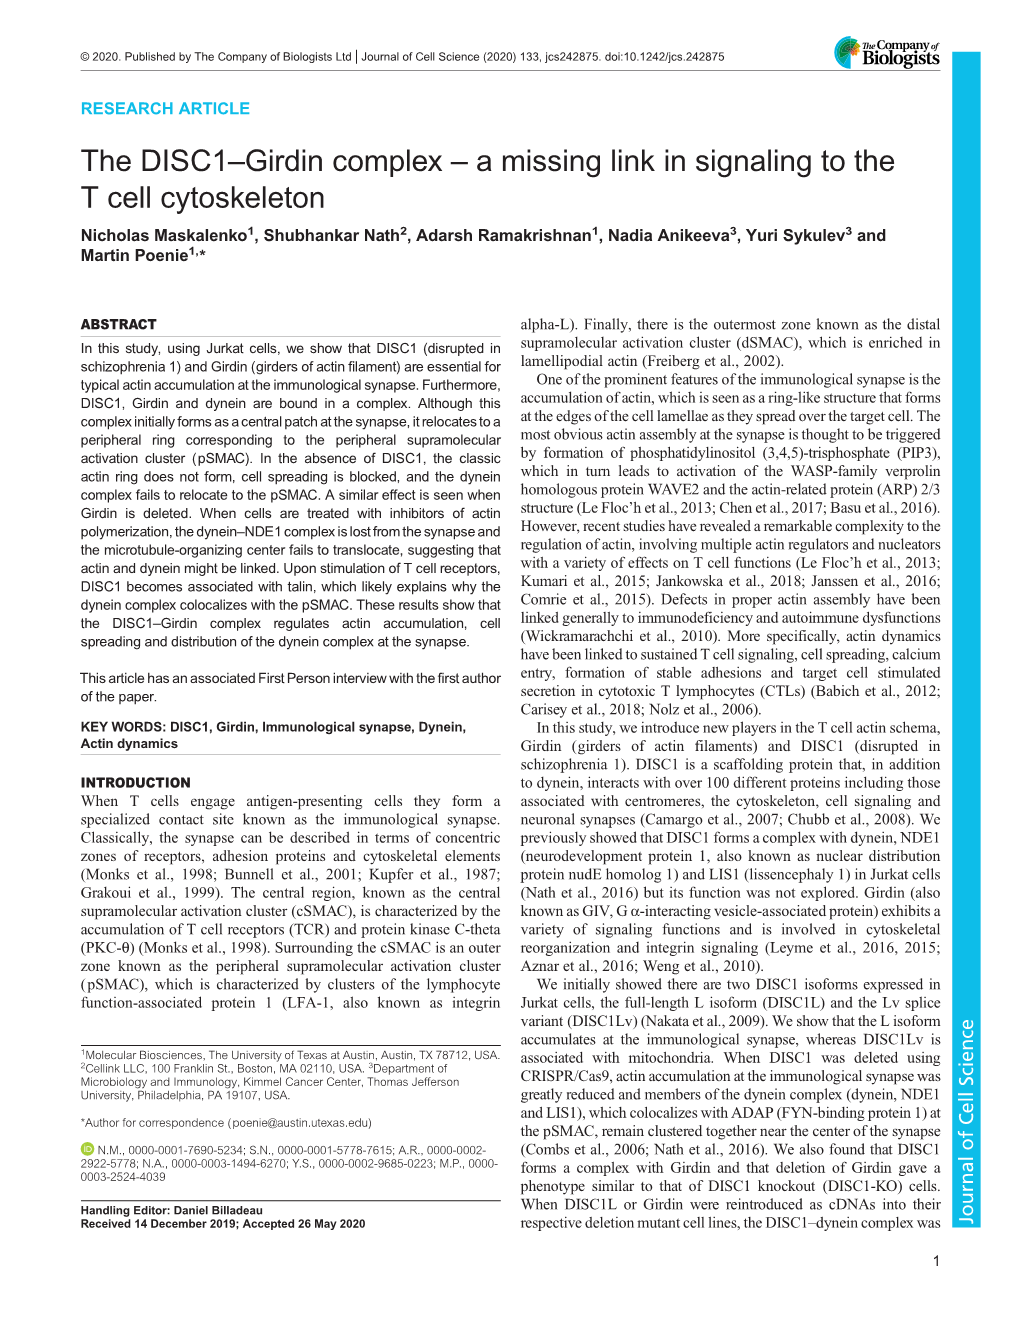 The DISC1–Girdin Complex – a Missing Link in Signaling to the T Cell Cytoskeleton